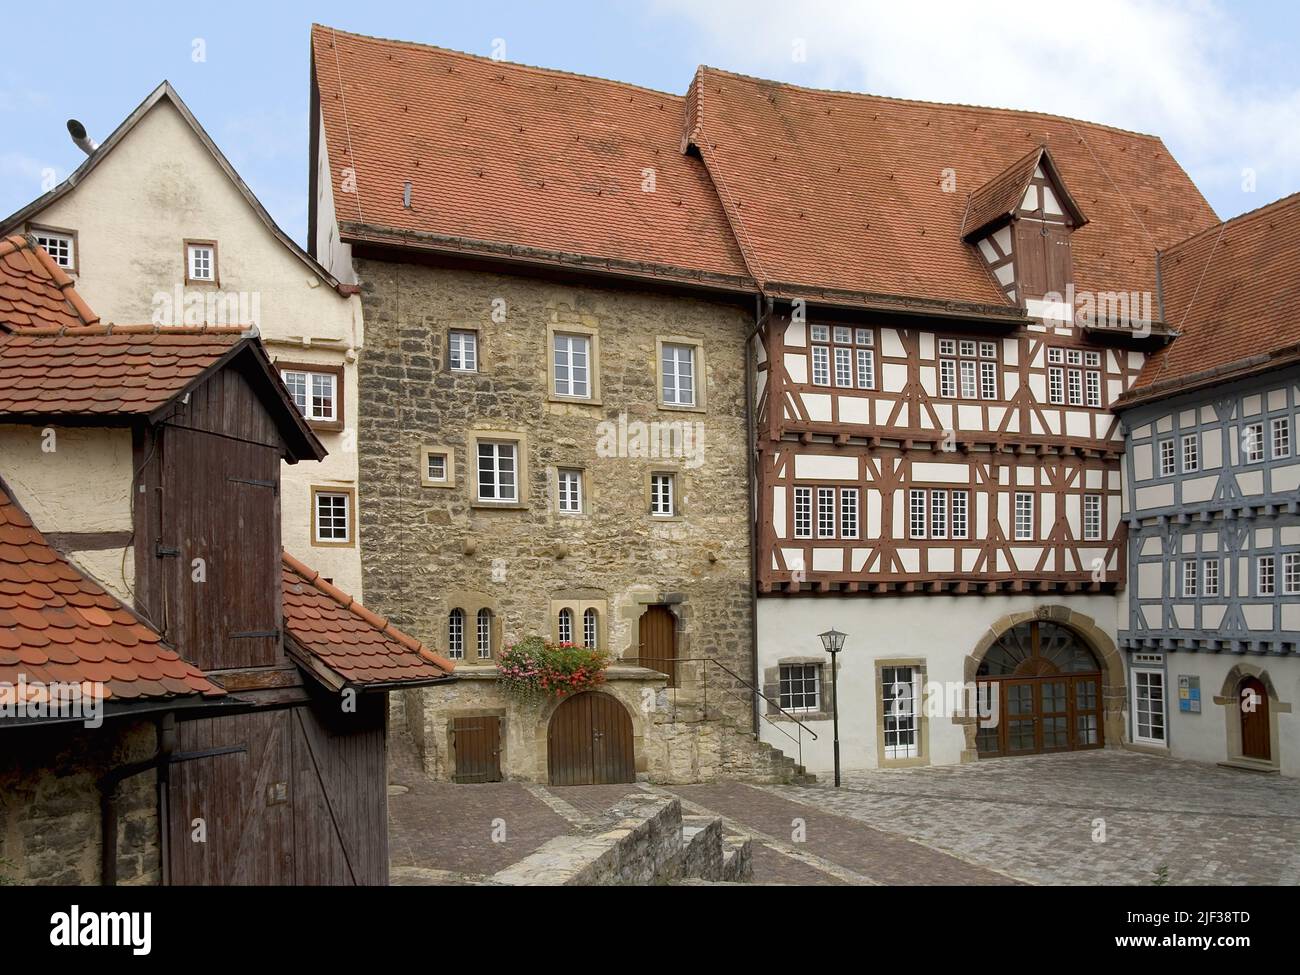 half-timbered houses in the old town, Germany, Baden-Wuerttemberg, Bad Wimpfen Stock Photo